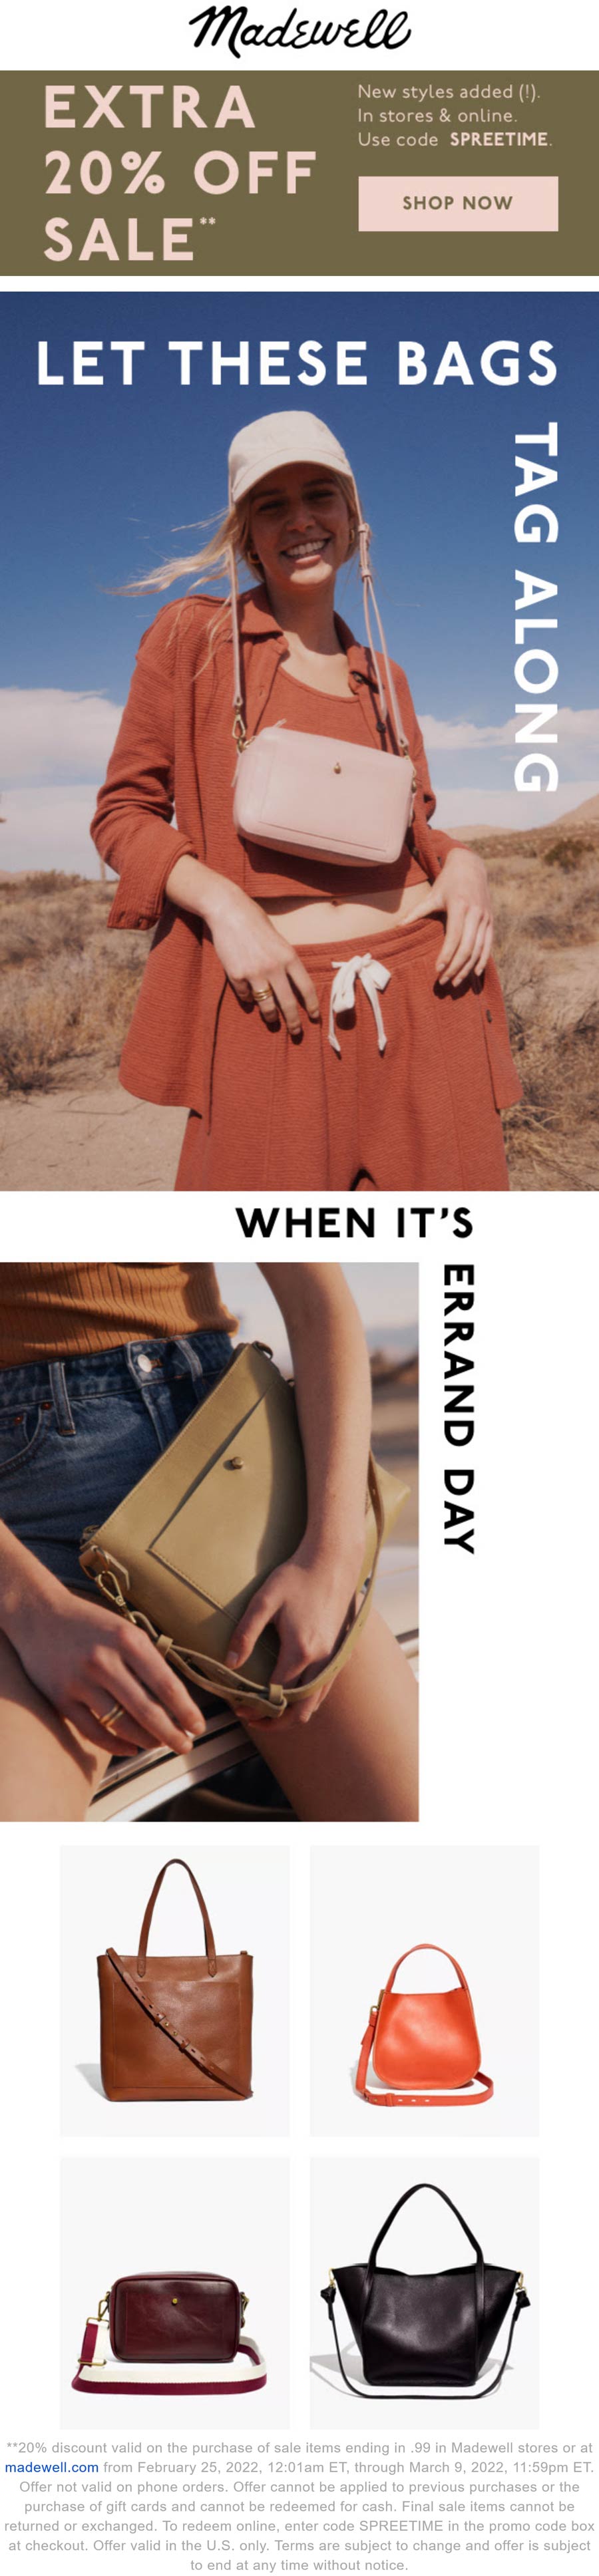 Madewell stores Coupon  Extra 20% off sale items at Madewell, or online via promo code SPREETIME #madewell 